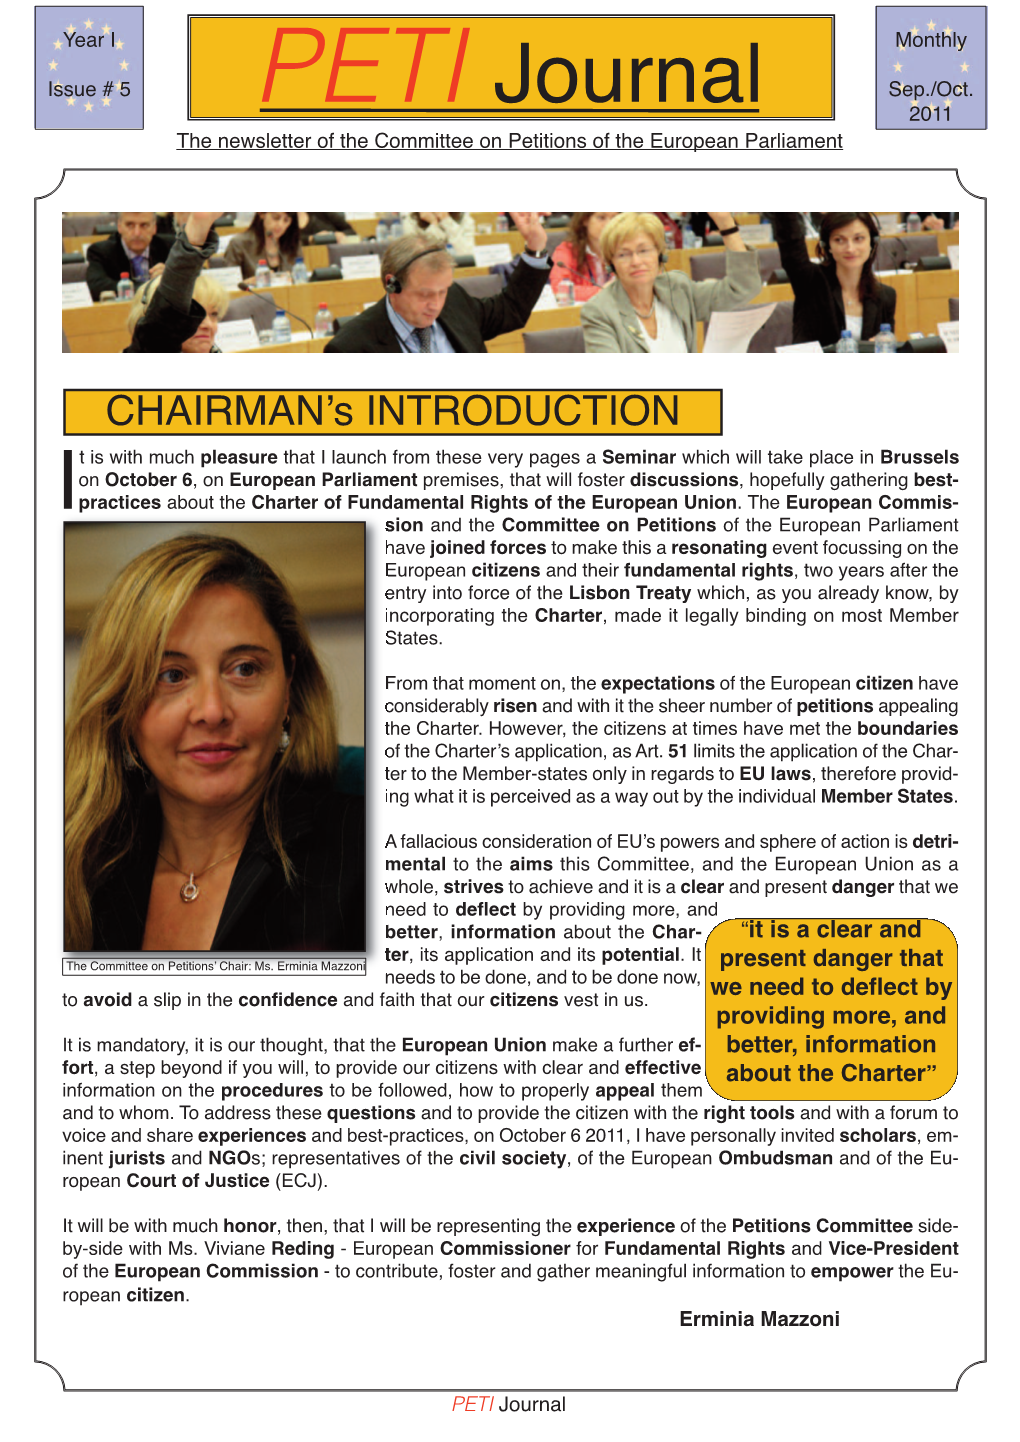 PETI Journal in THIS ISSUE NOTES from the CHAIRMAN (By Ms